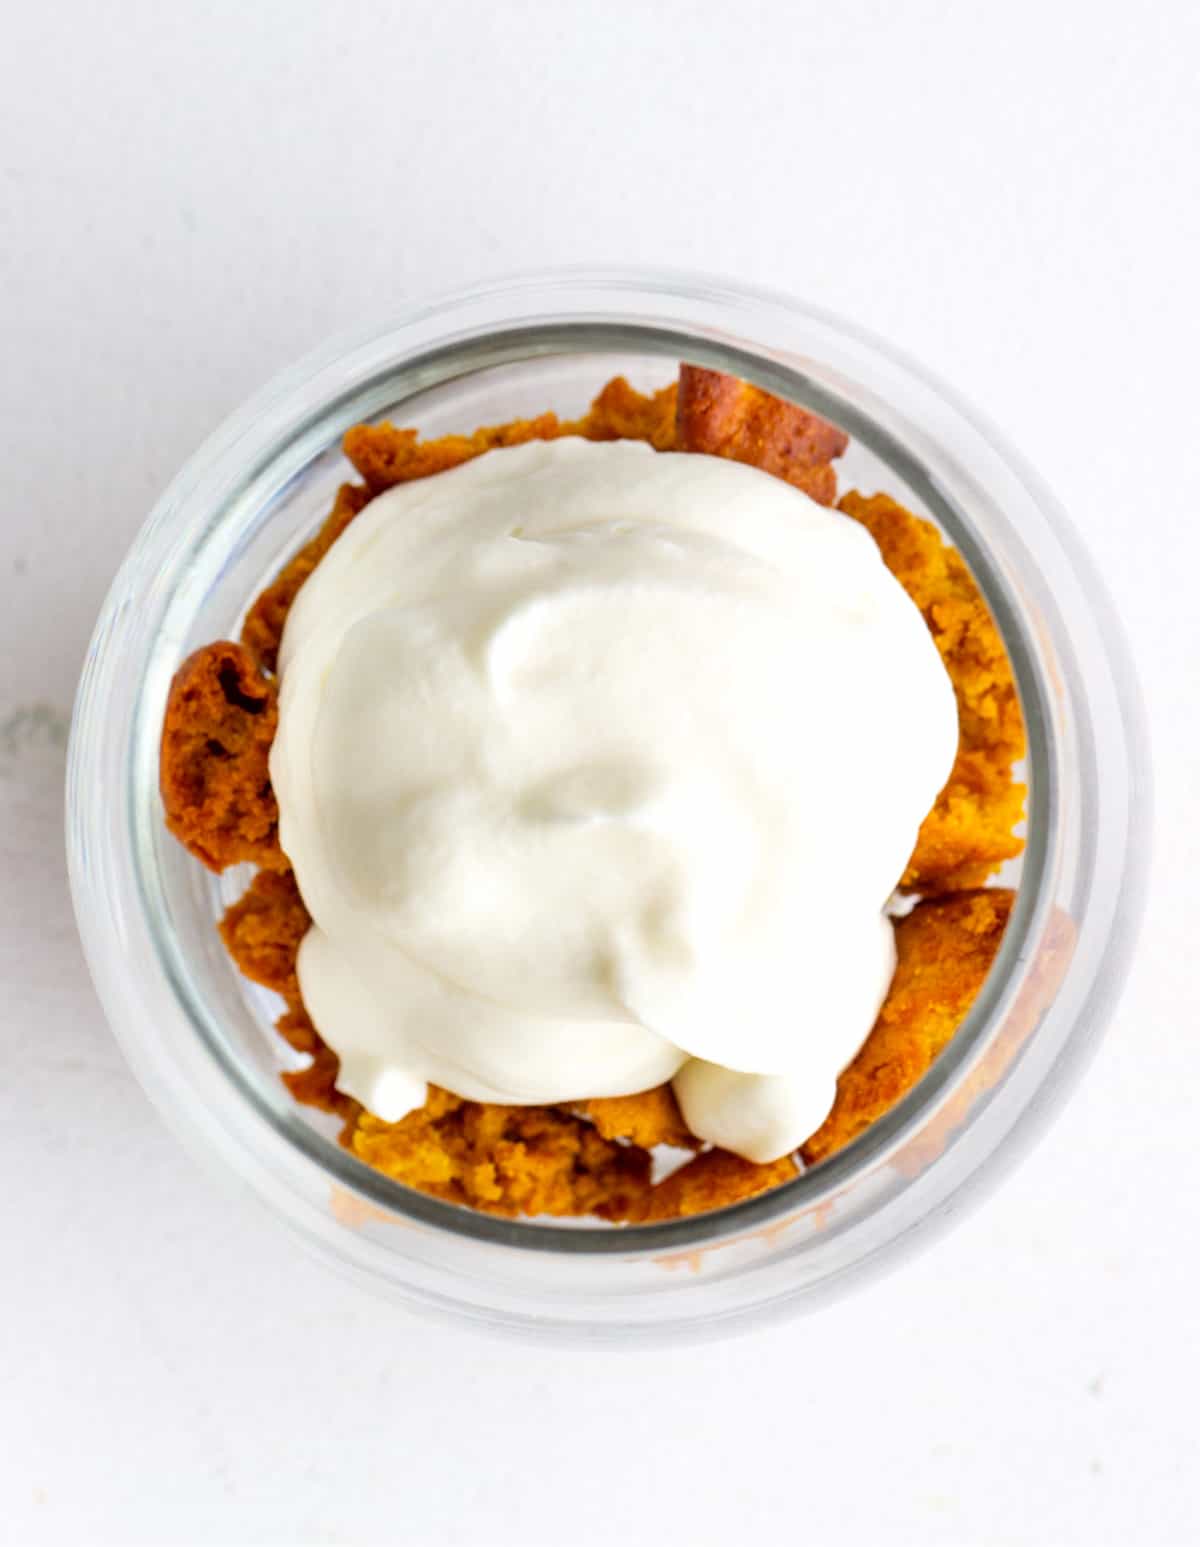 Top view of cream dollop atop pumpkin cake crumbs in a glass 